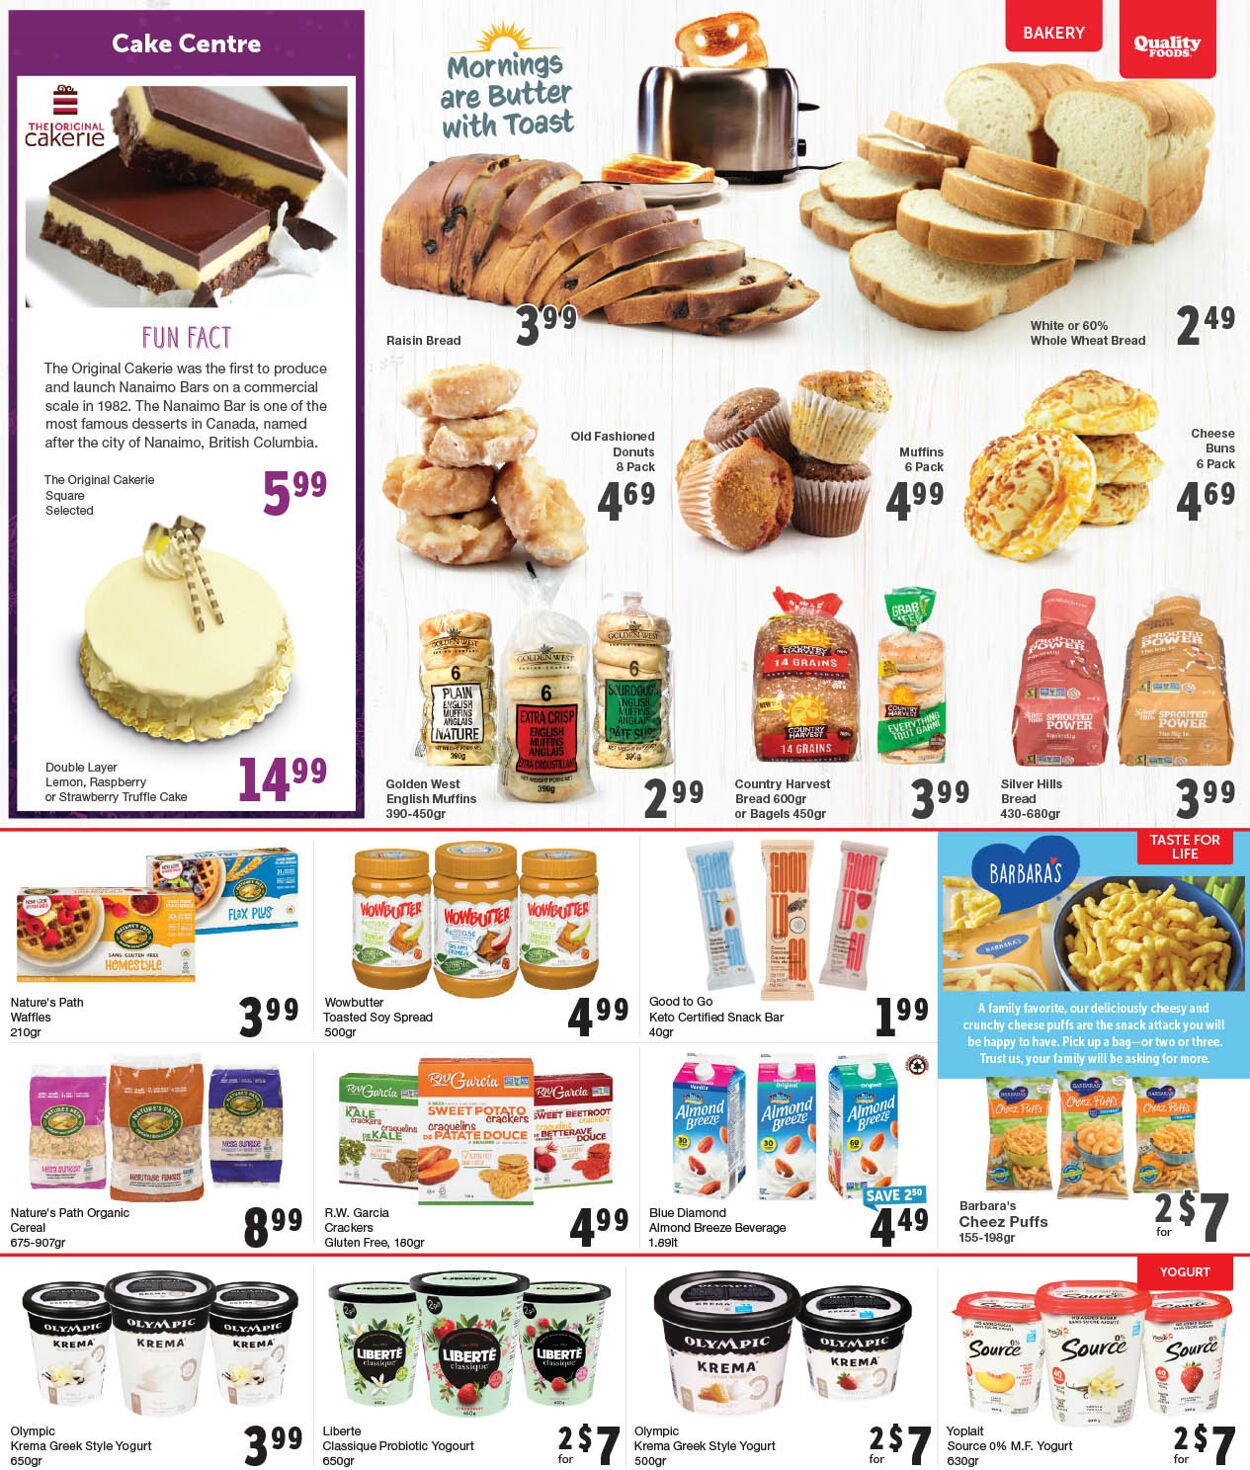 Flyer Quality Foods 20.03.2023 - 26.03.2023